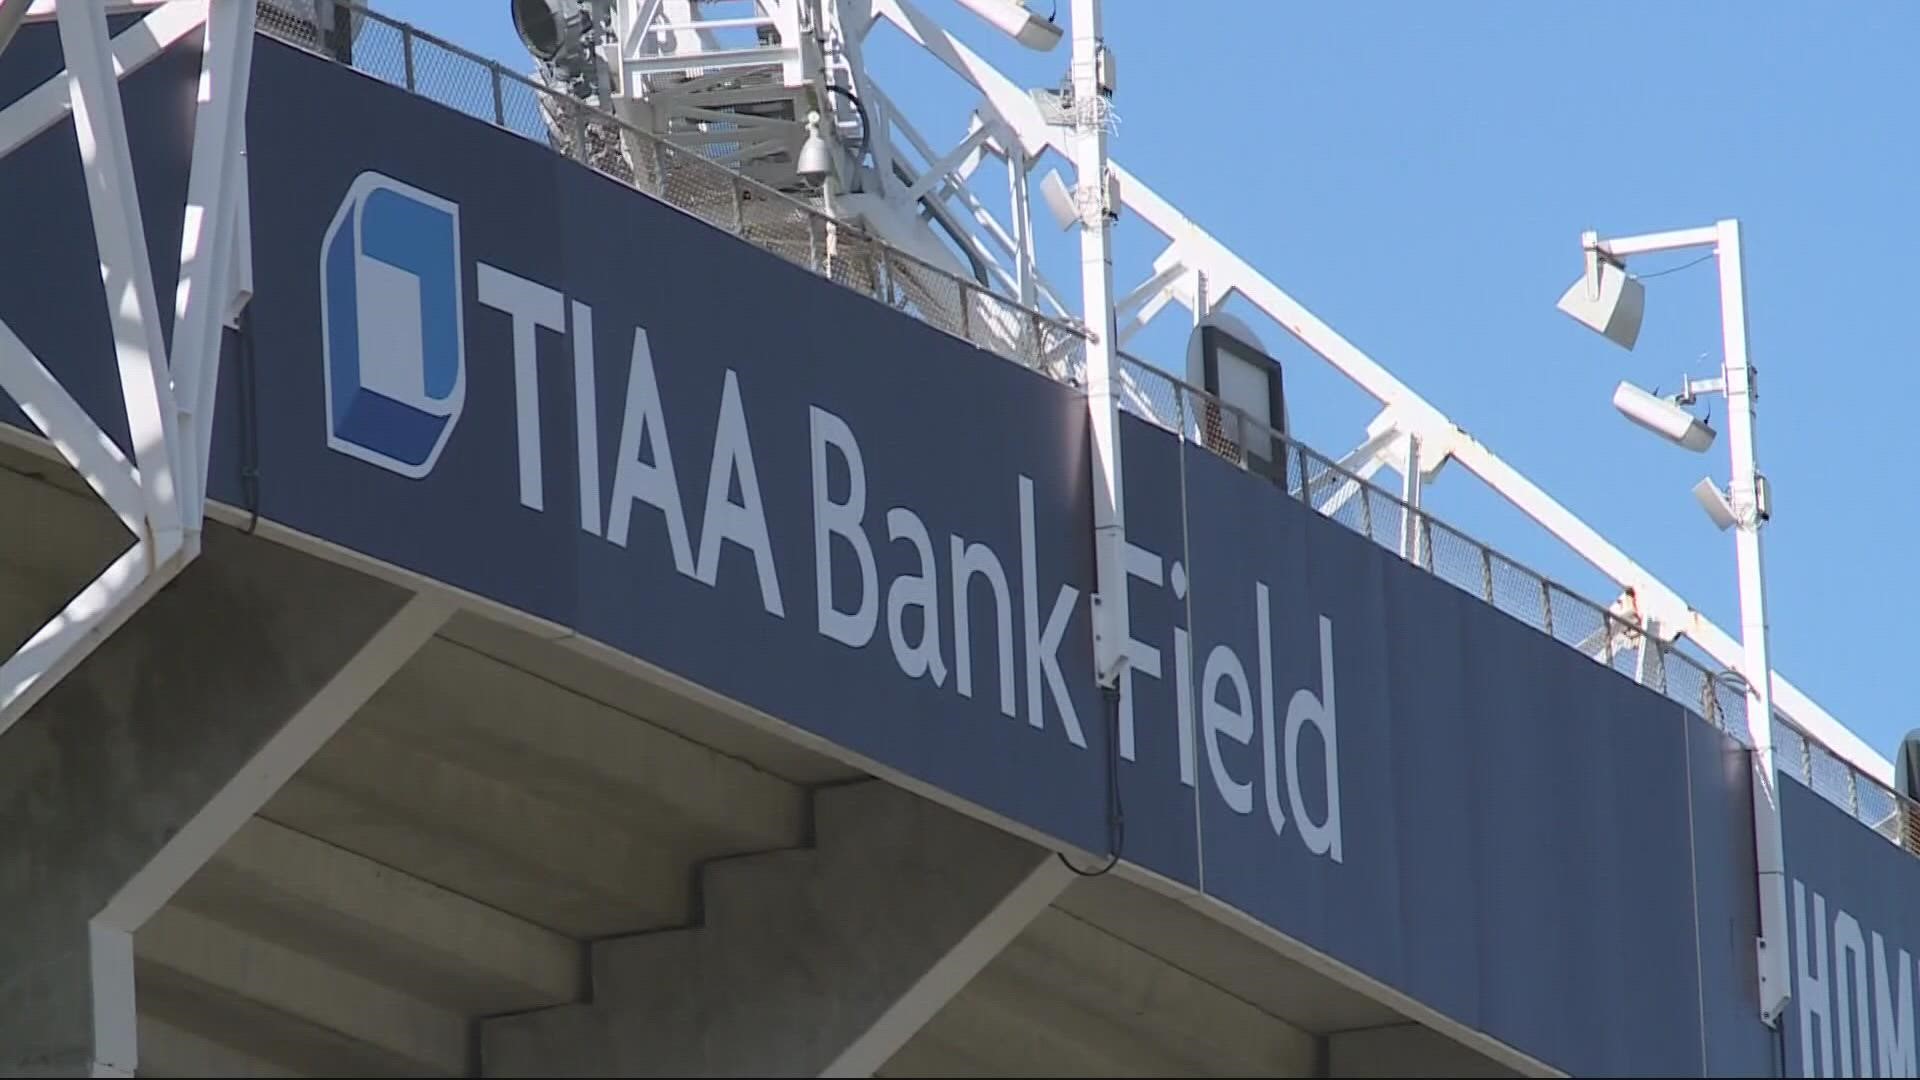 According to food inspection reports, health inspectors have found dead rodents, rodent droppings and unsanitary conditions at TIAA Bank Field concession stands.